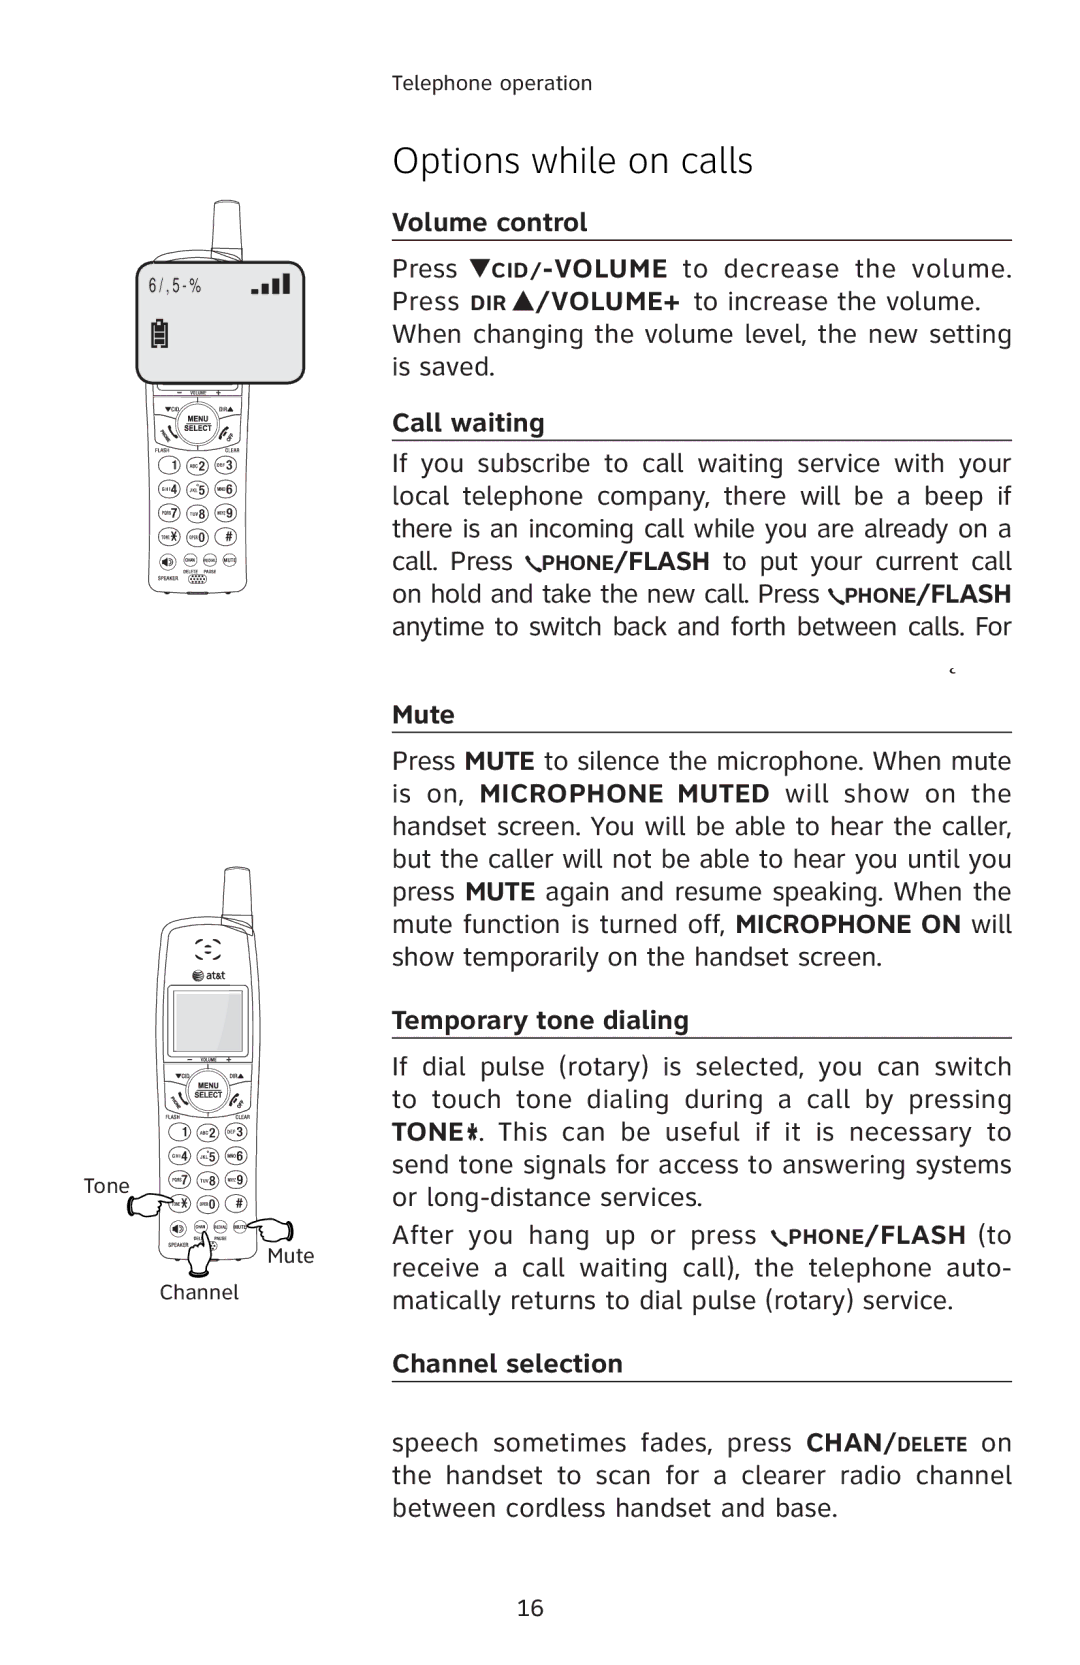 AT&T E5811 user manual Options while on calls 